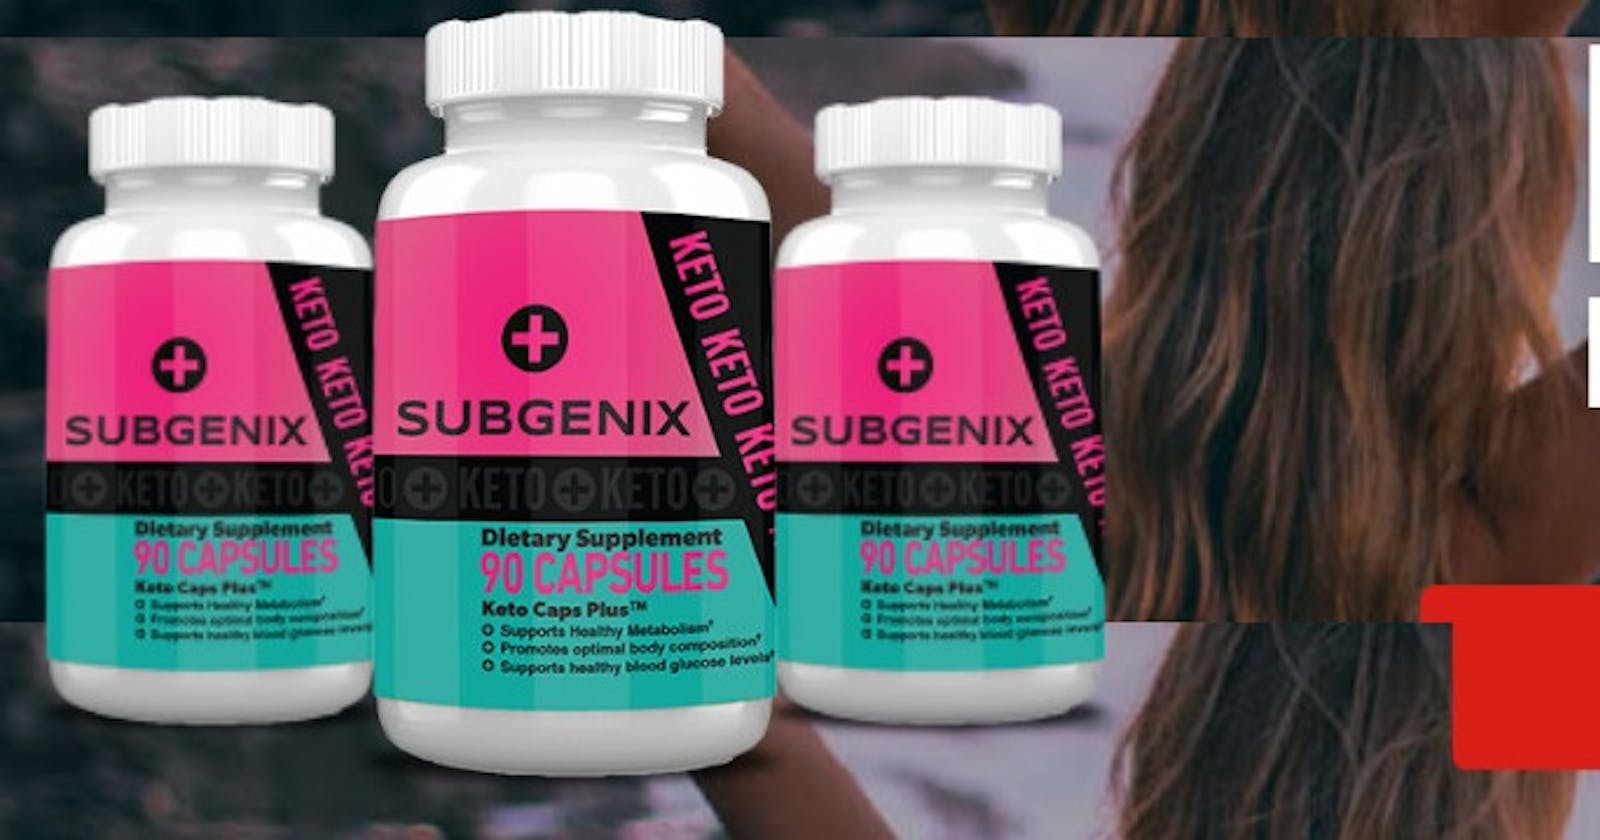 Subgenix Keto Gummies vs. Keto Pills: Which is Better for Weight Loss?